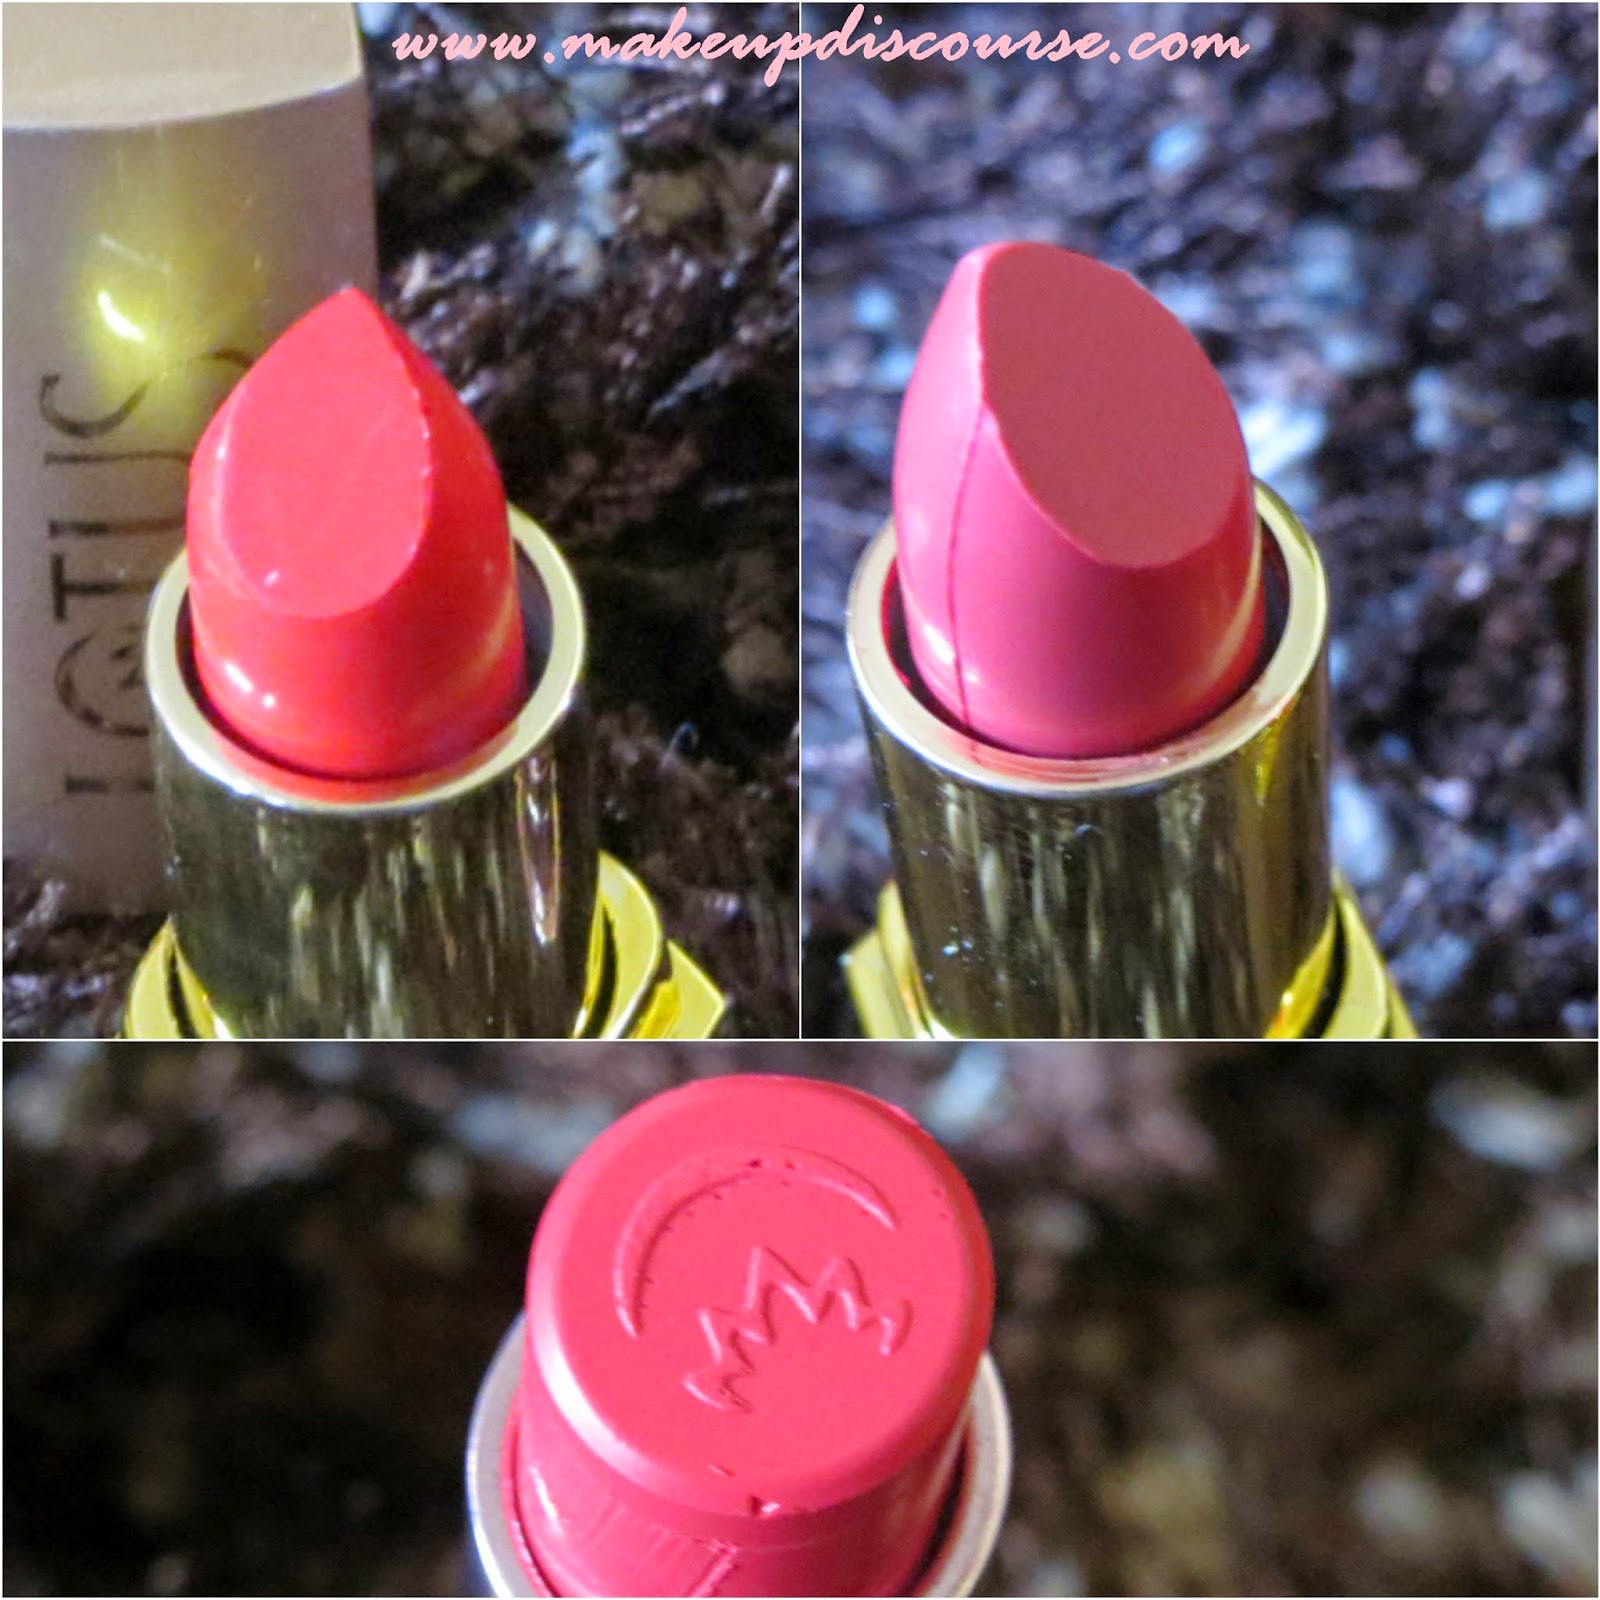 Lotus Herbals Pure Colors and Eco Stay Lipstick Carnation, Tangerine and Coral Candy